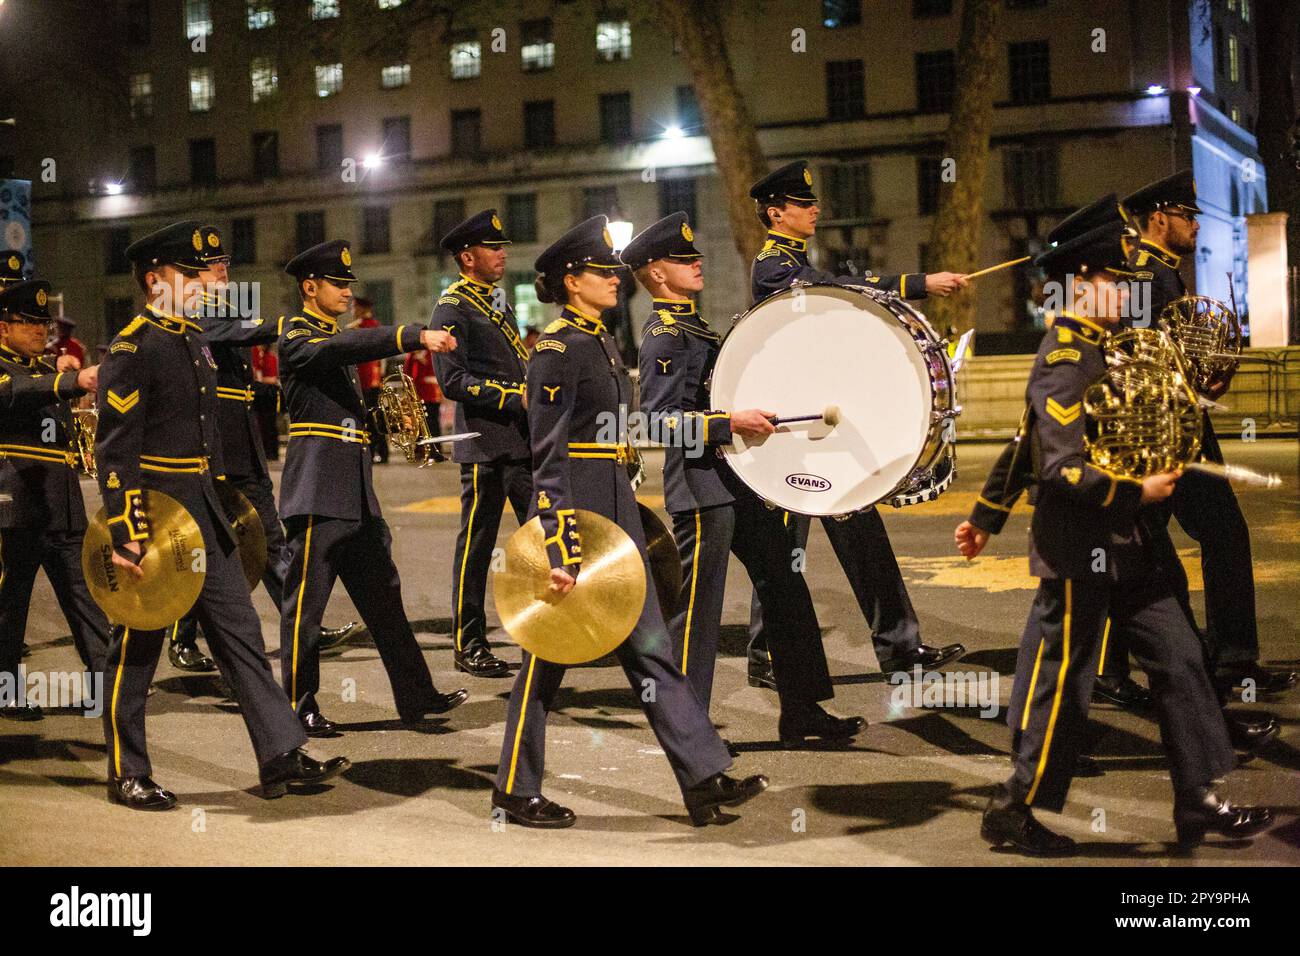 RAF Music Band Marching during Night time Military Rehearsal for the Coronation of King Charles III Stock Photo